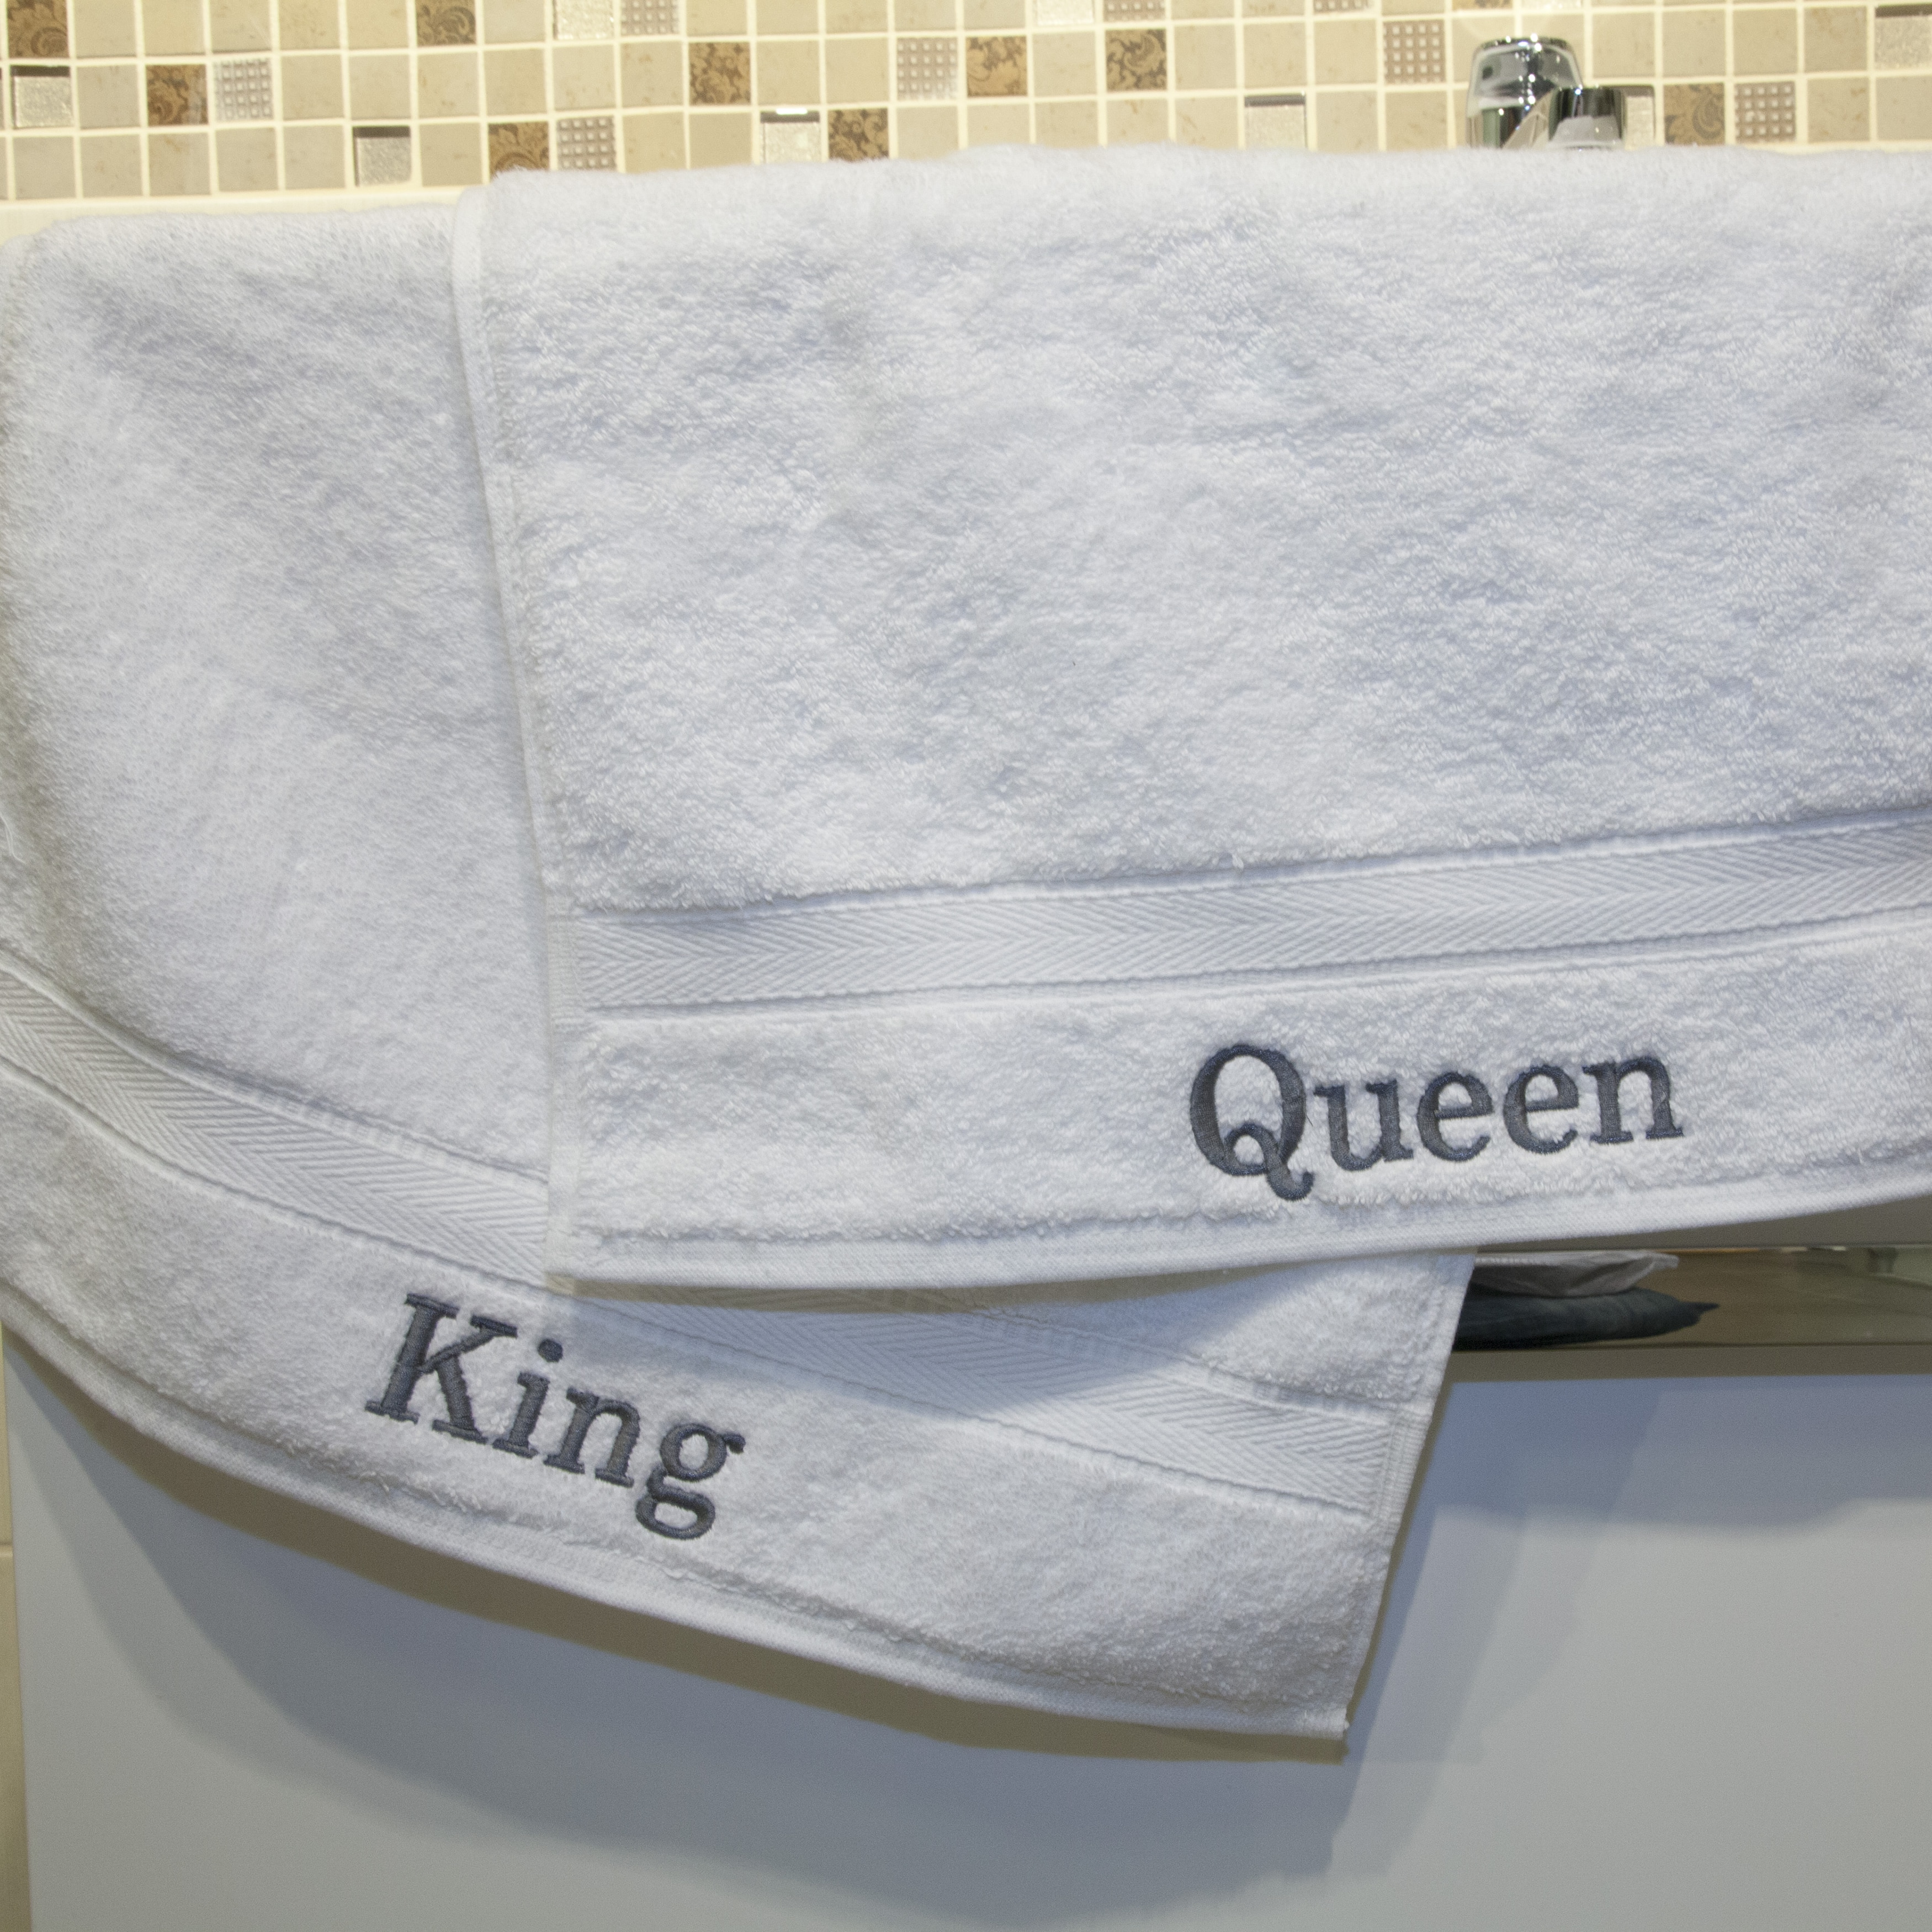 https://ak1.ostkcdn.com/images/products/7894841/Authentic-Hotel-and-Spa-Personalized-King-and-Queen-Turkish-Cotton-Hand-Towel-Set-of-2-9a0af304-4dc5-43ab-ae72-dd4cd5baa38d.jpg